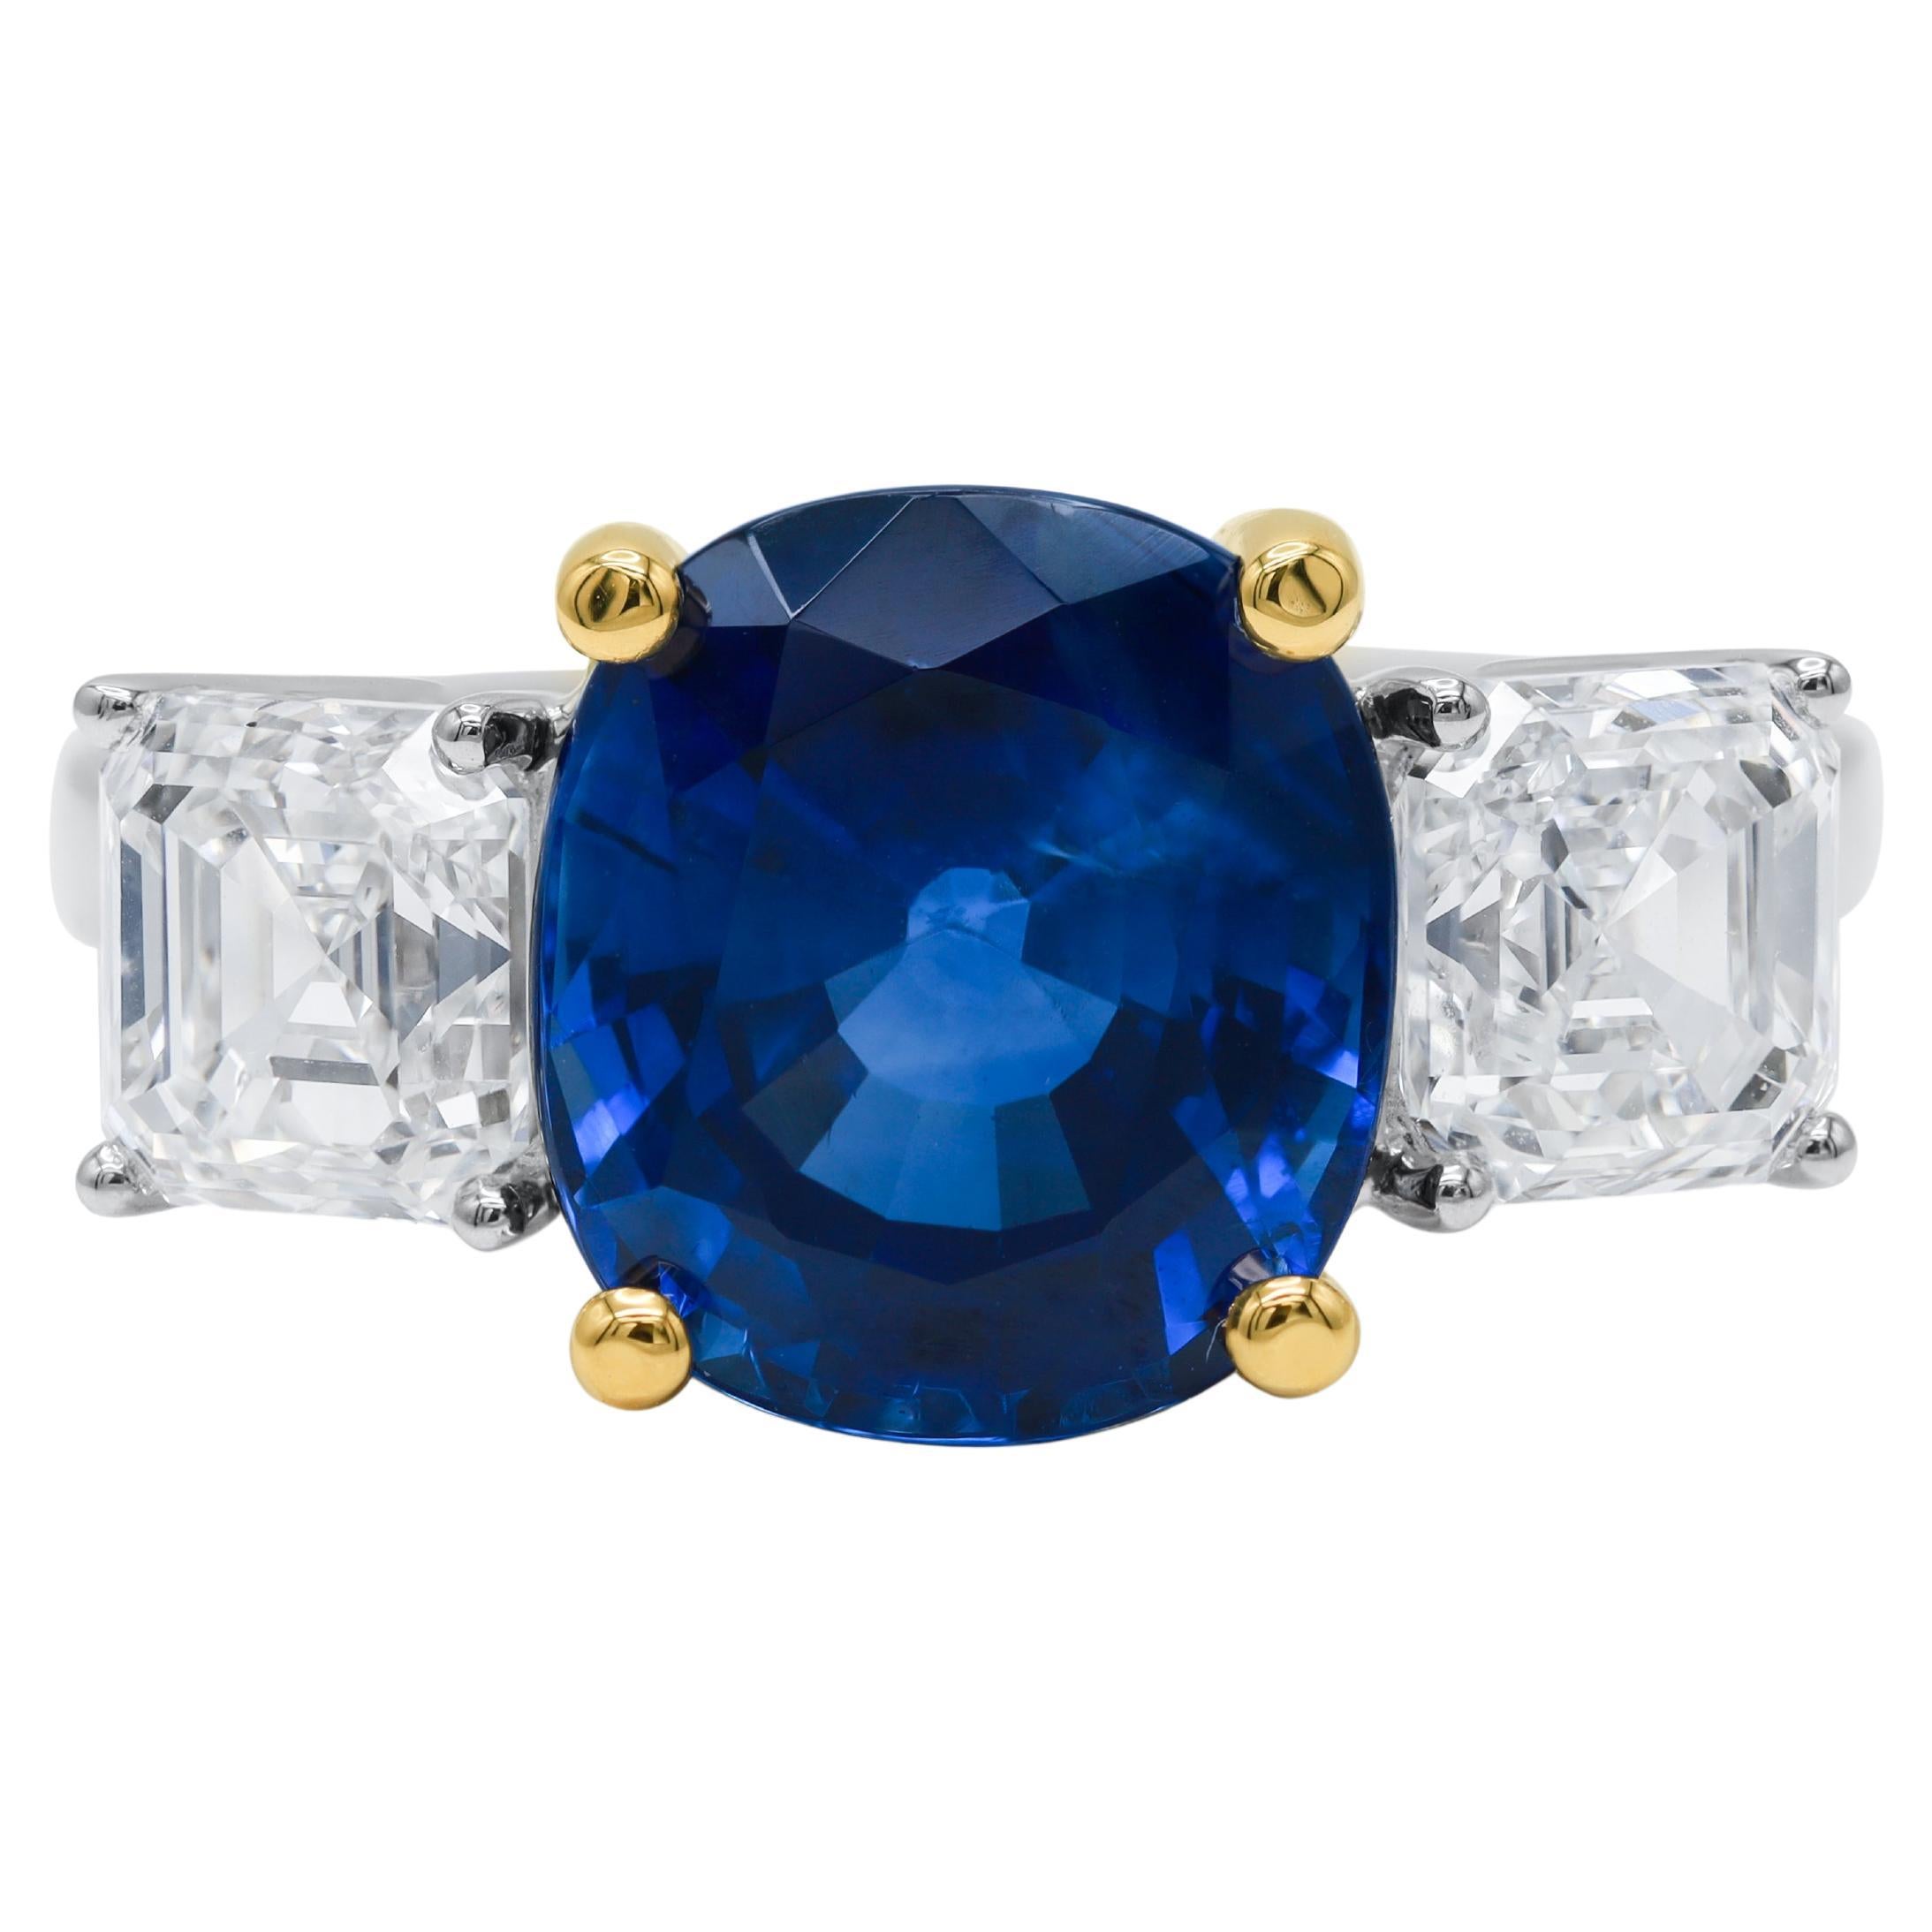 Diana M. 18kt White Gold Sapphire Diamond Ring 5.61cts For Sale